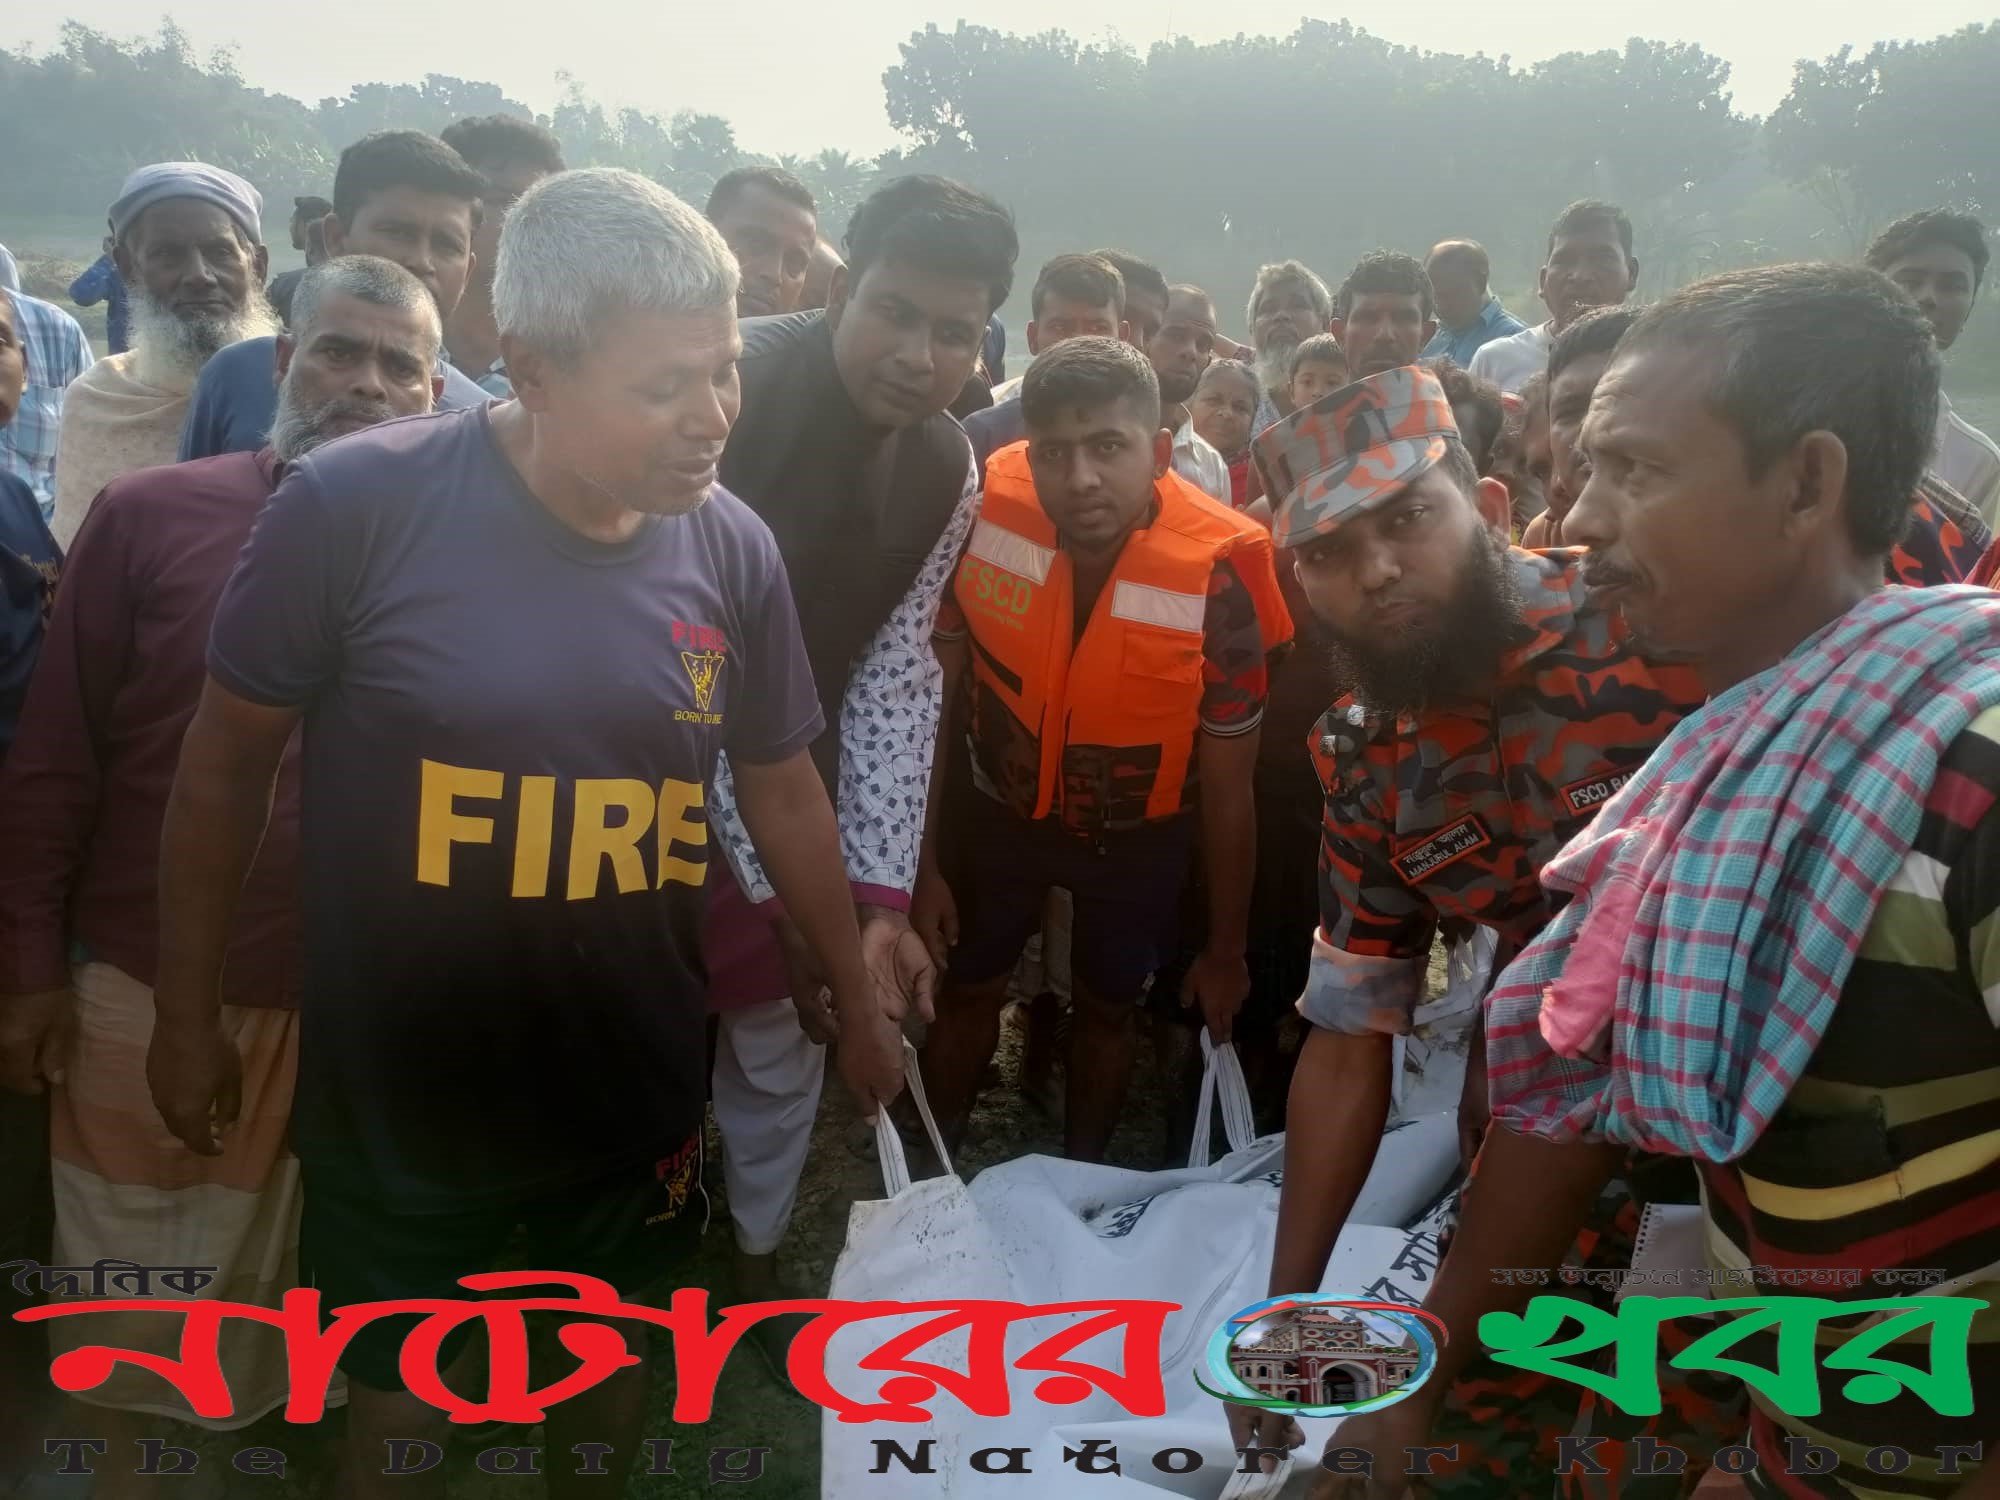 Bagatipara dead body Recovery News PIC 06 11 22 1